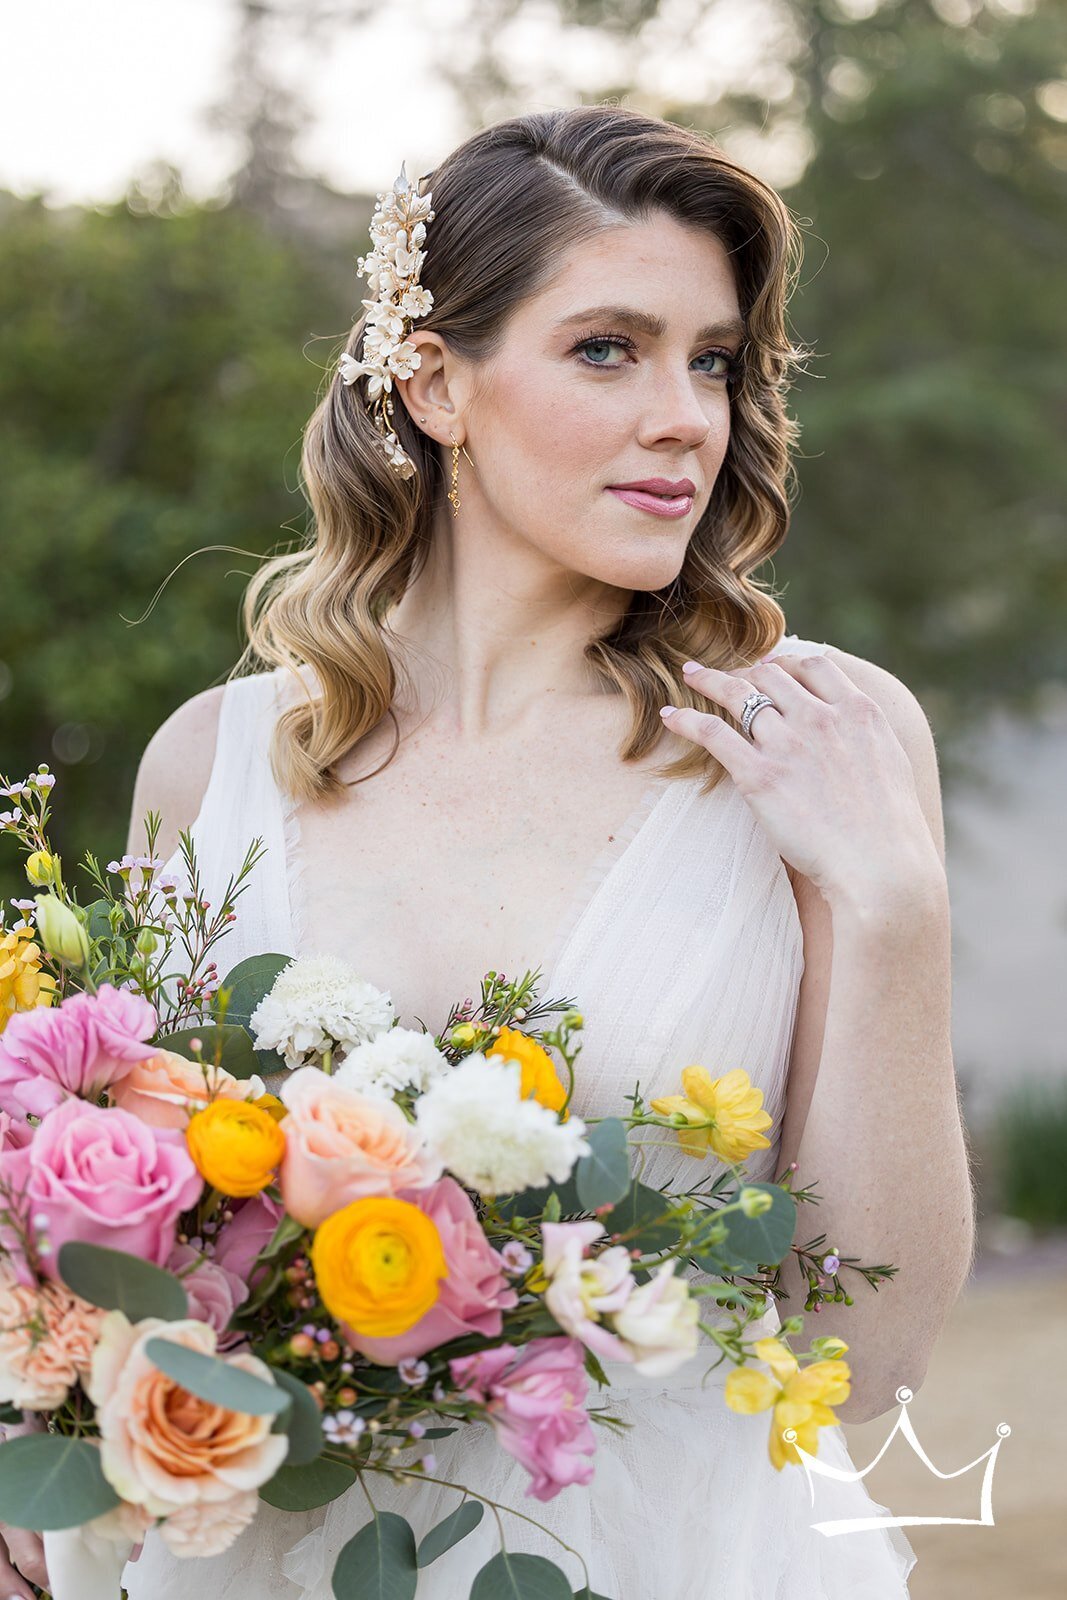 Trista in a wedding dress, holding a bouquet of flowers.